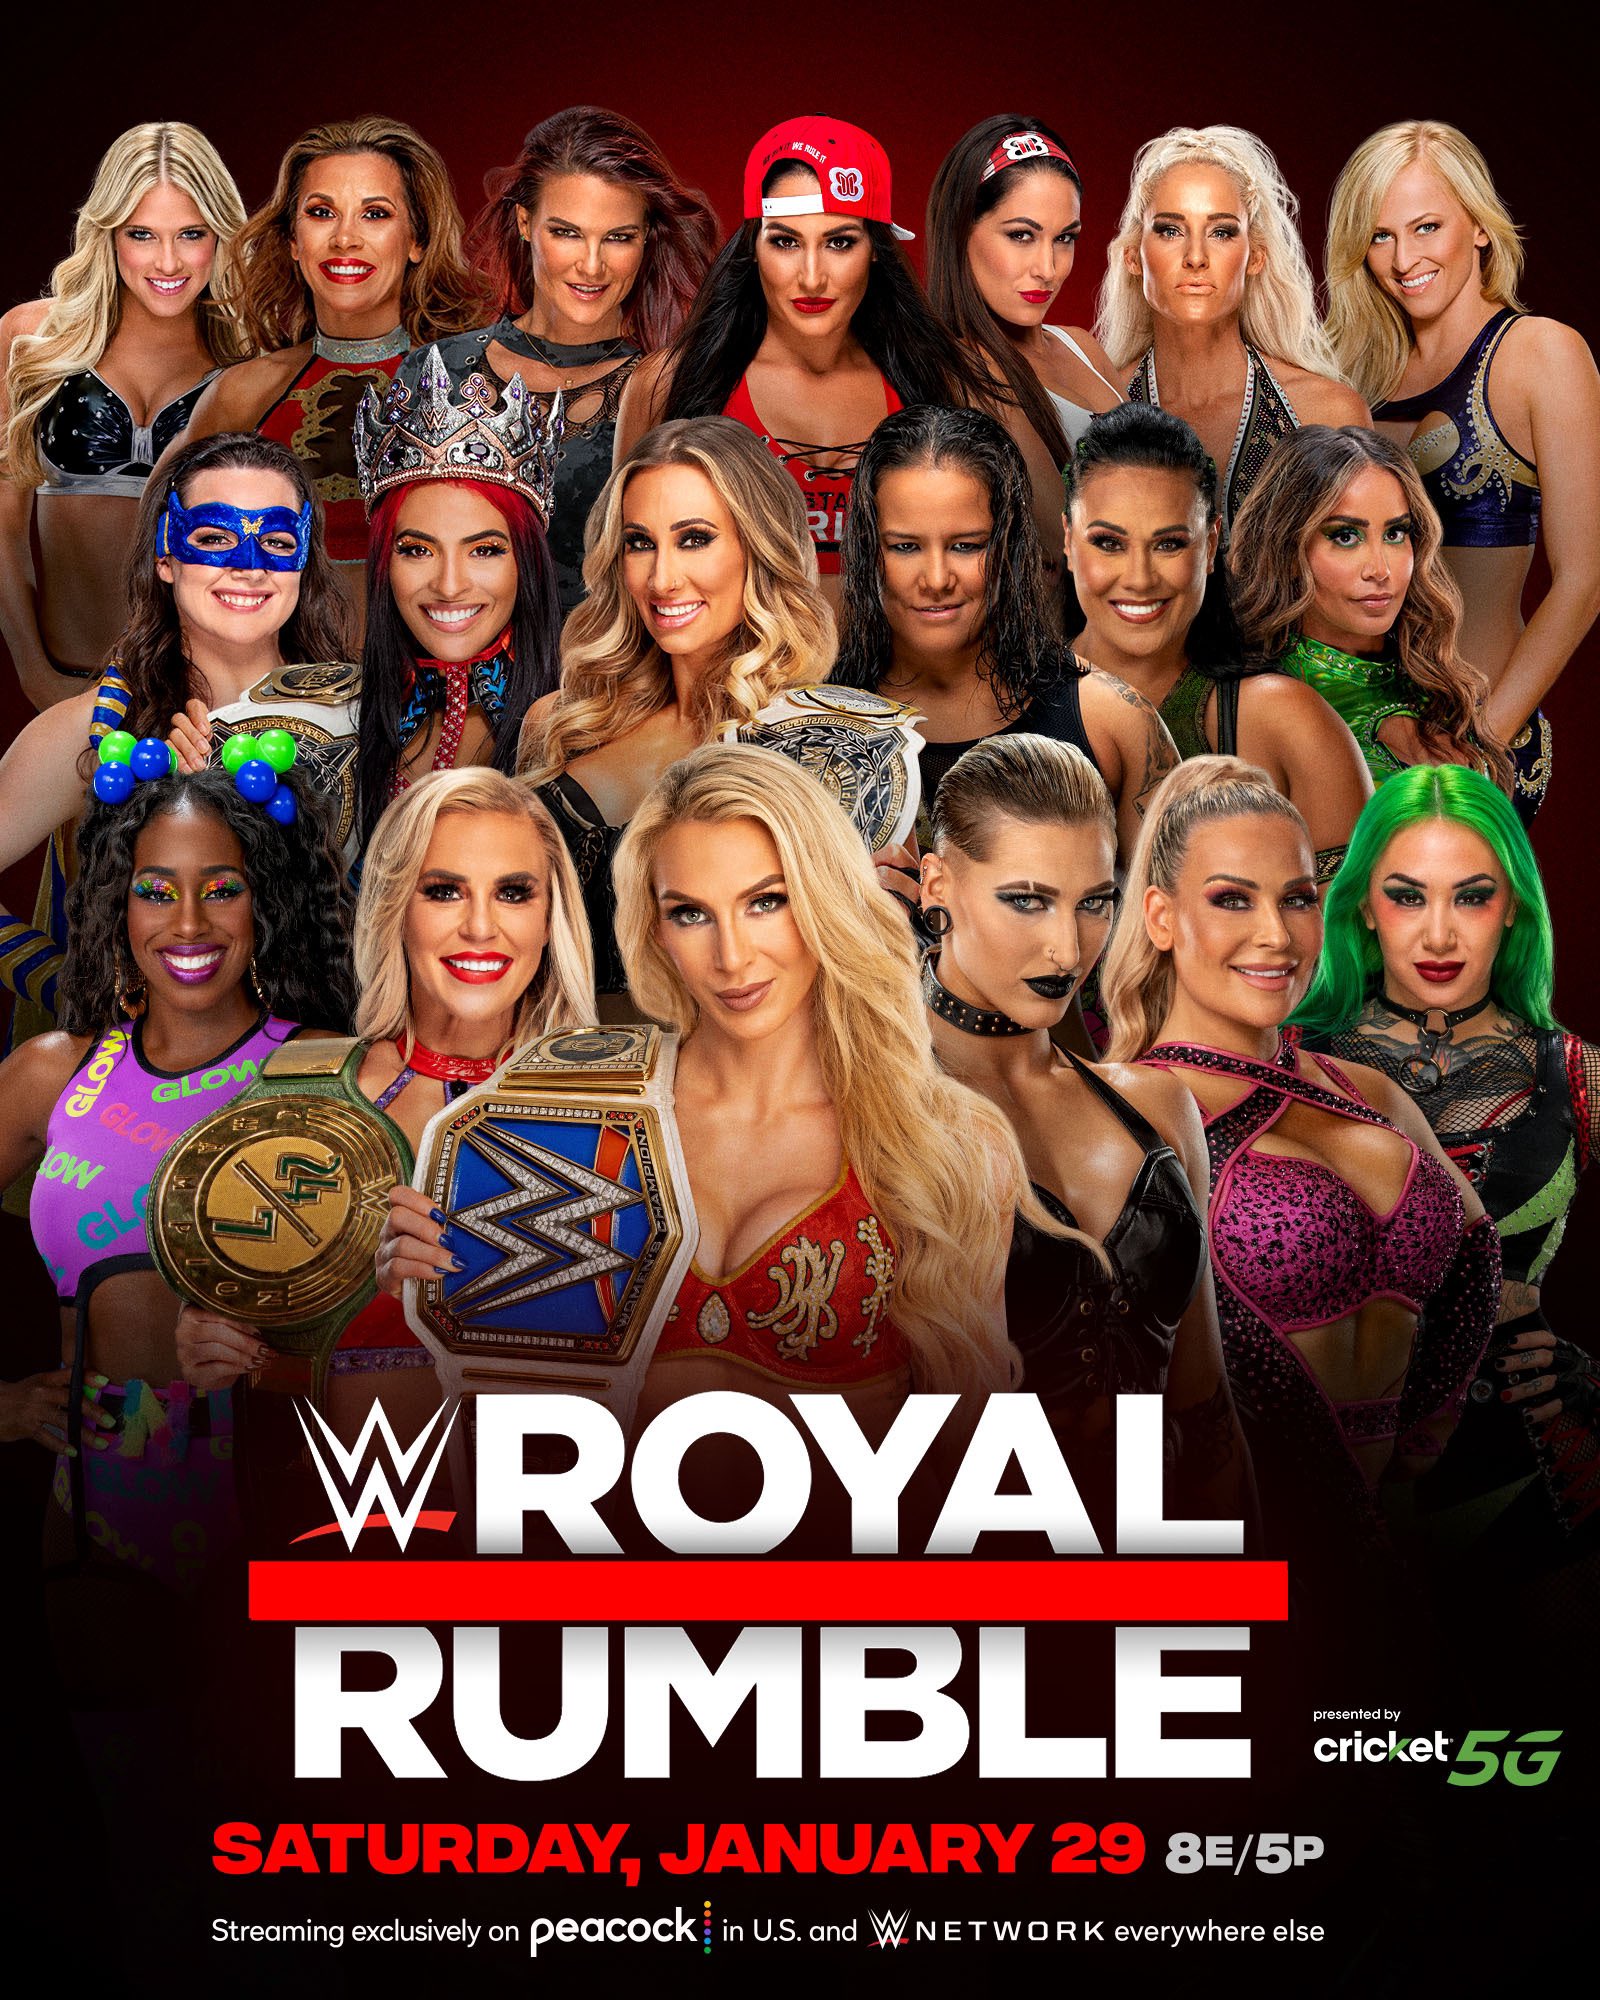 WWE Royal Rumble 2022: The Bella Twins React On Their Returning News 81